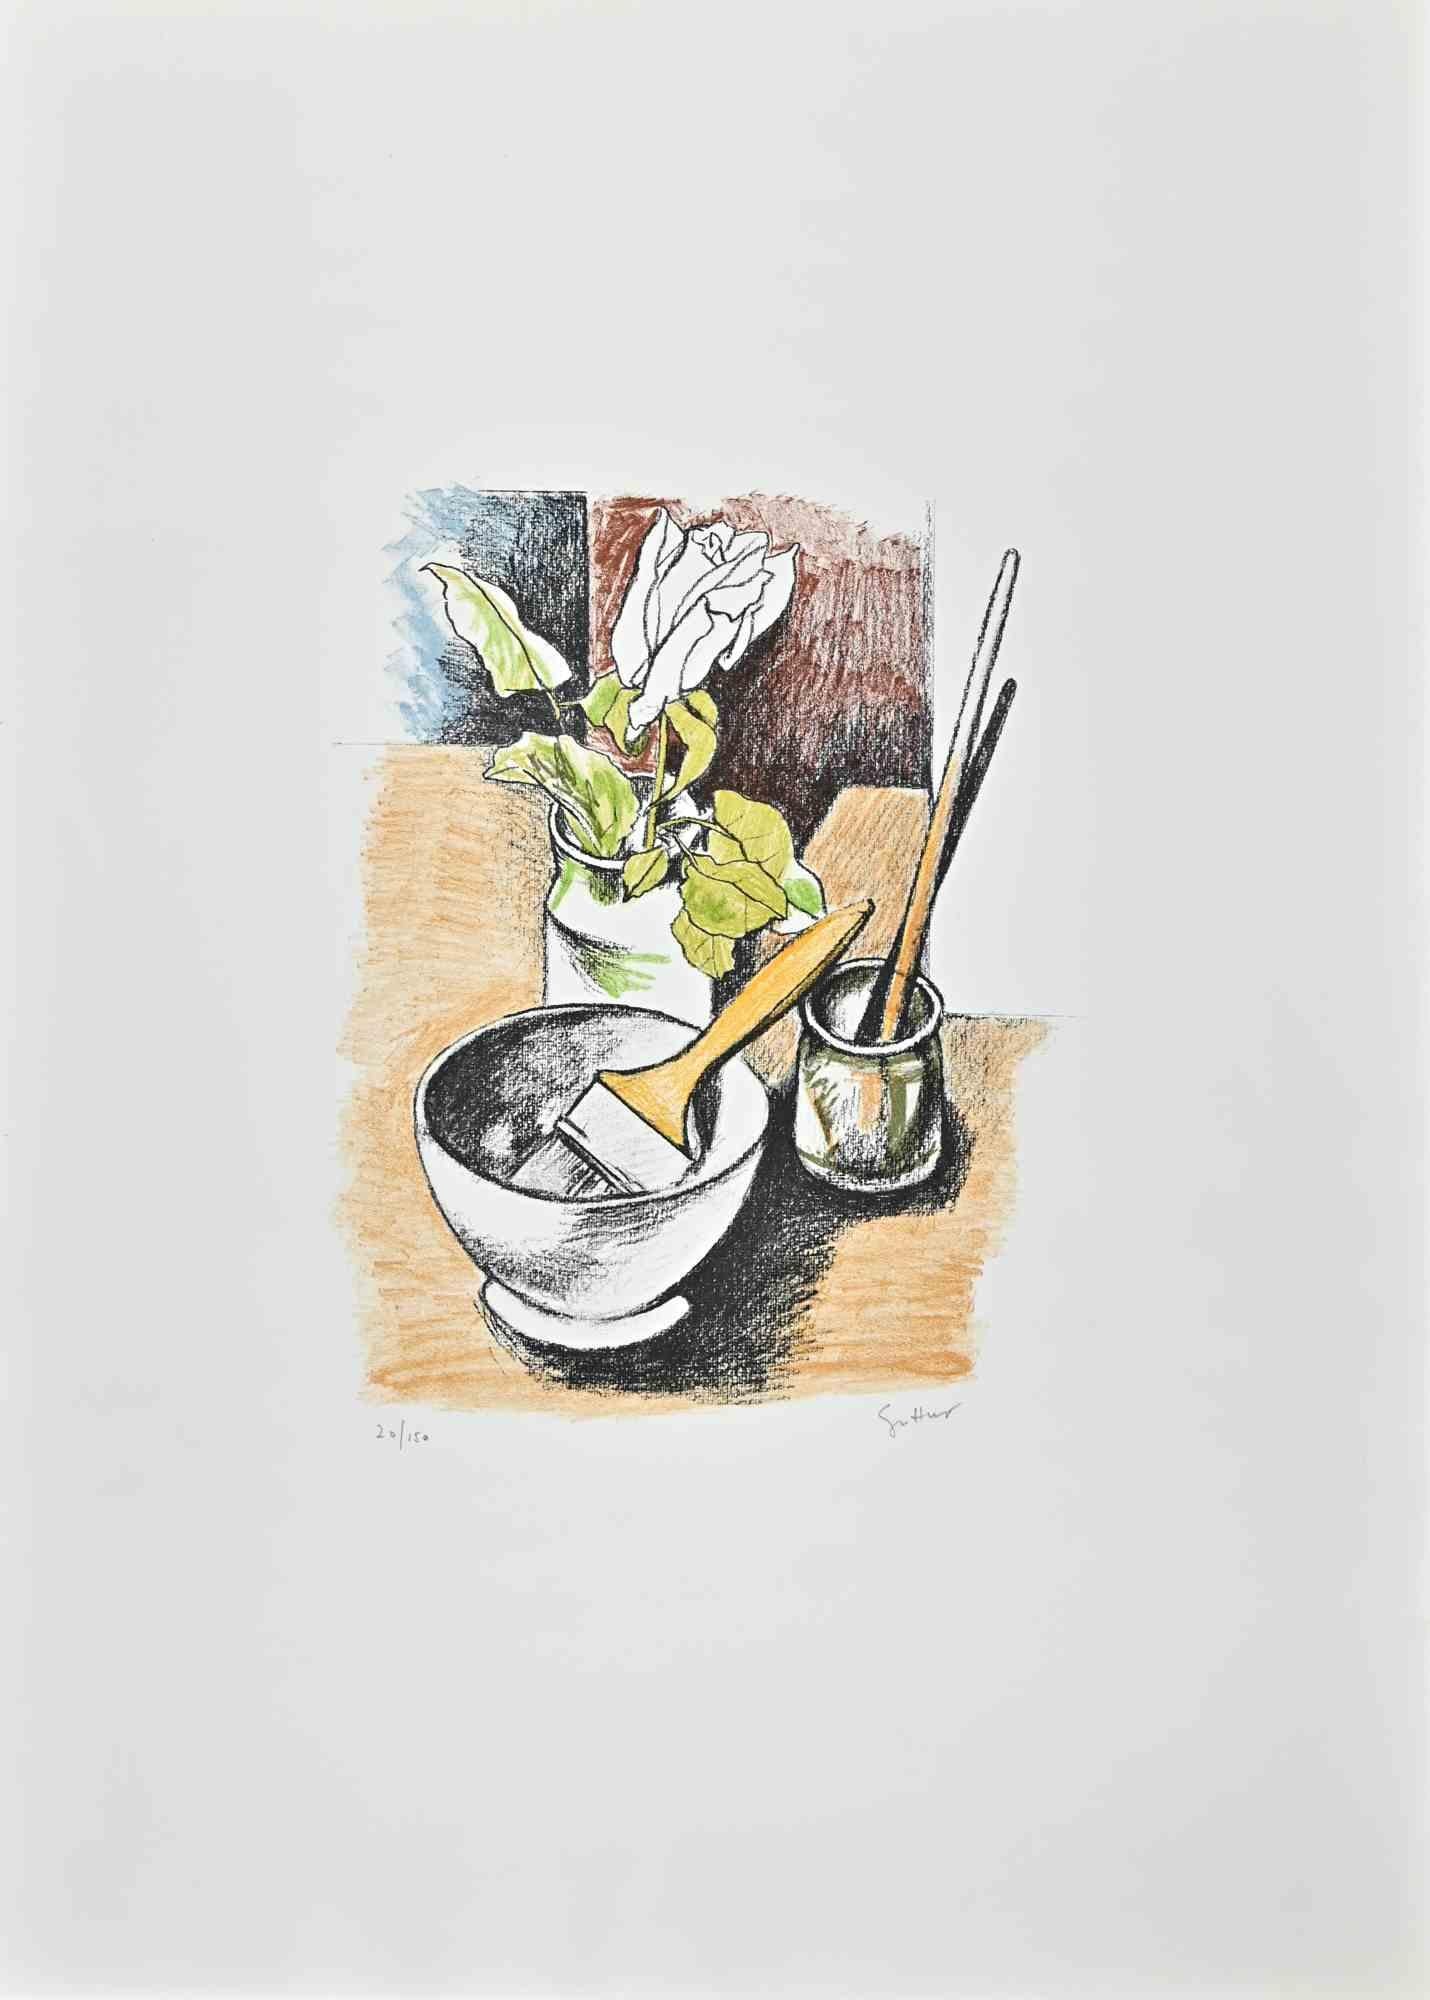 Still Life is a Lithograph by the Sicilian artist Renato Guttuso.

Good conditions.

Hand signed and numbered, Edition 20/150.

Renato Guttuso  (Bagheria, Palermo 1912 - Rome,1987) was a famous Italian painter of the 20th century.

Guttuso, born in